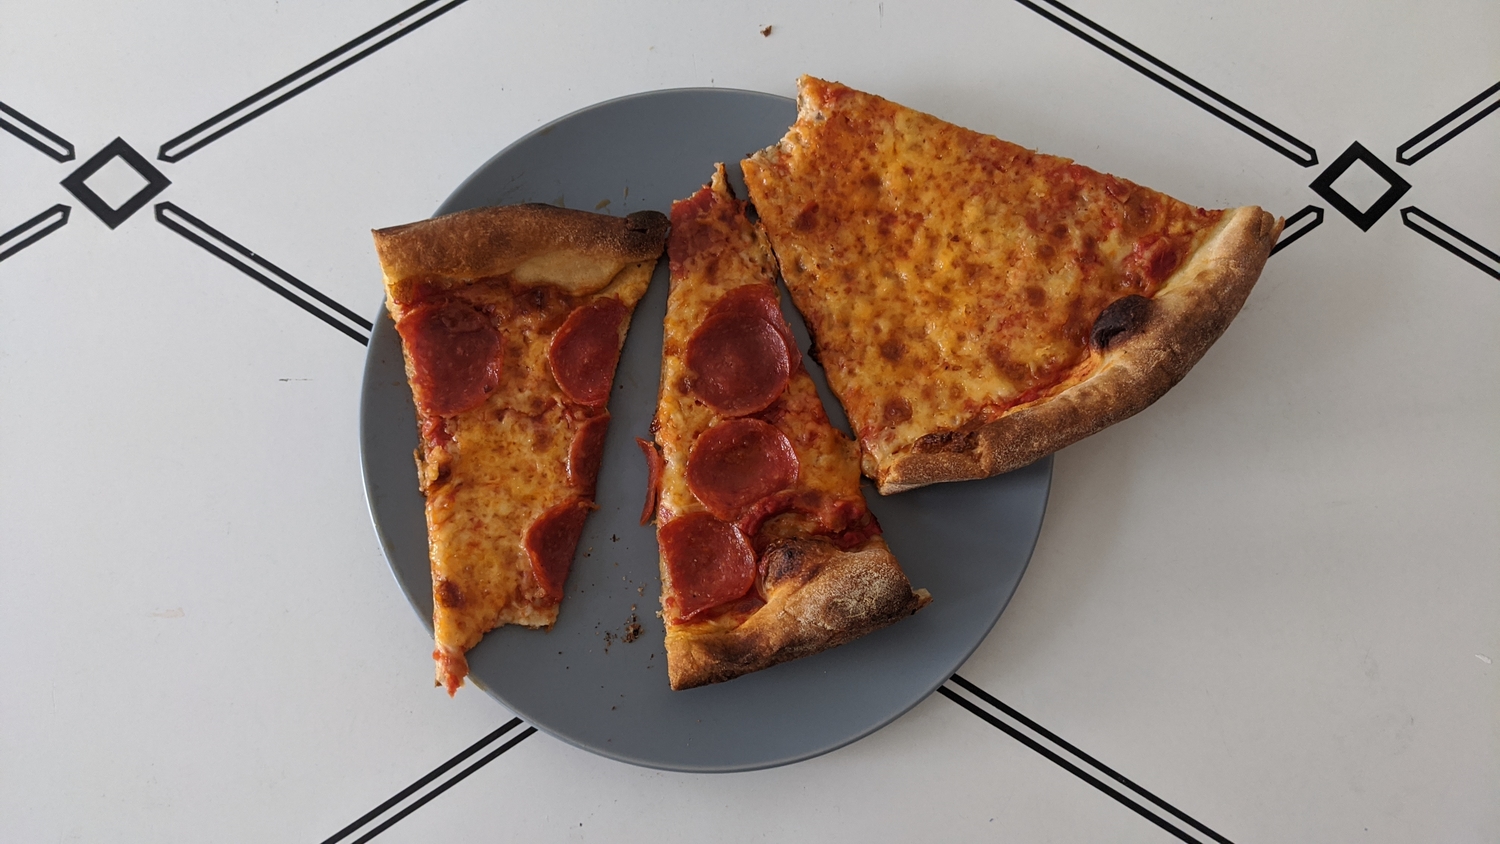 Three slices of pizza on a blue plate, after being microwaved in an experiment about how to reheat pizza.